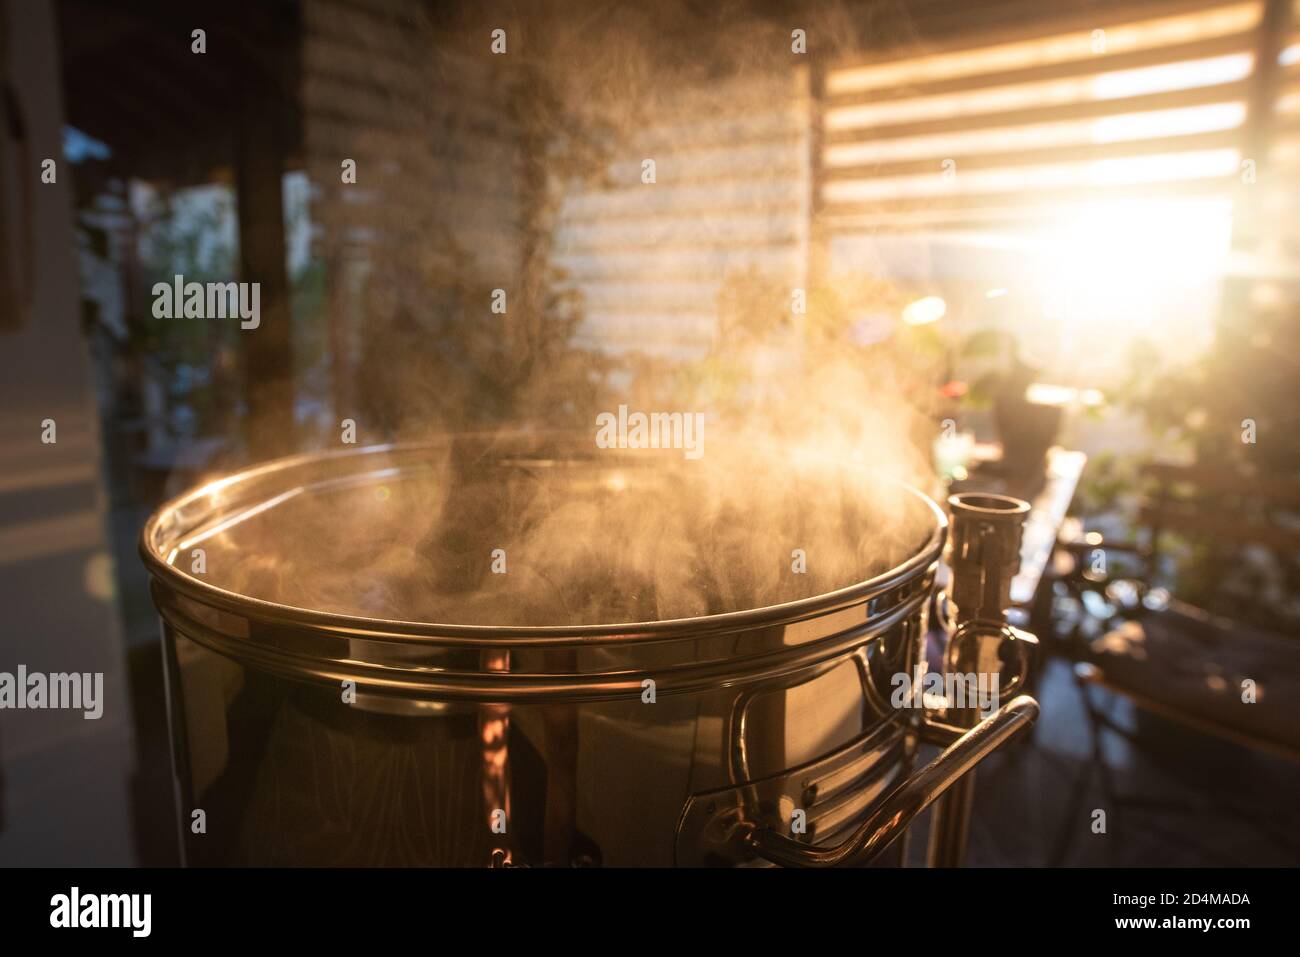 Most home brewers use brewing machines to brew beer at home. Stock Photo